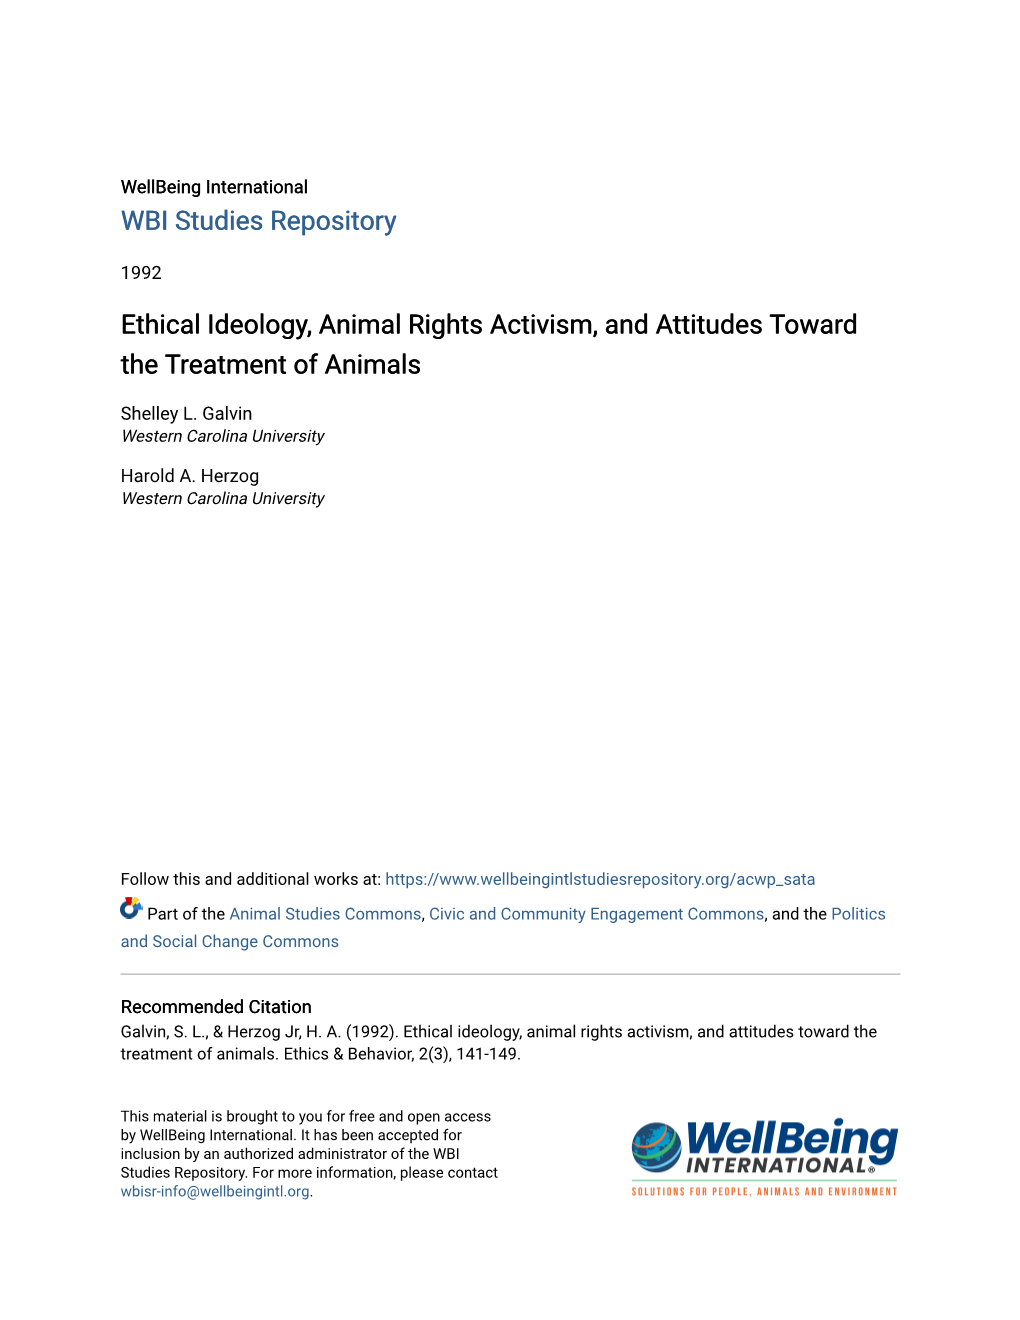 Ethical Ideology, Animal Rights Activism, and Attitudes Toward the Treatment of Animals